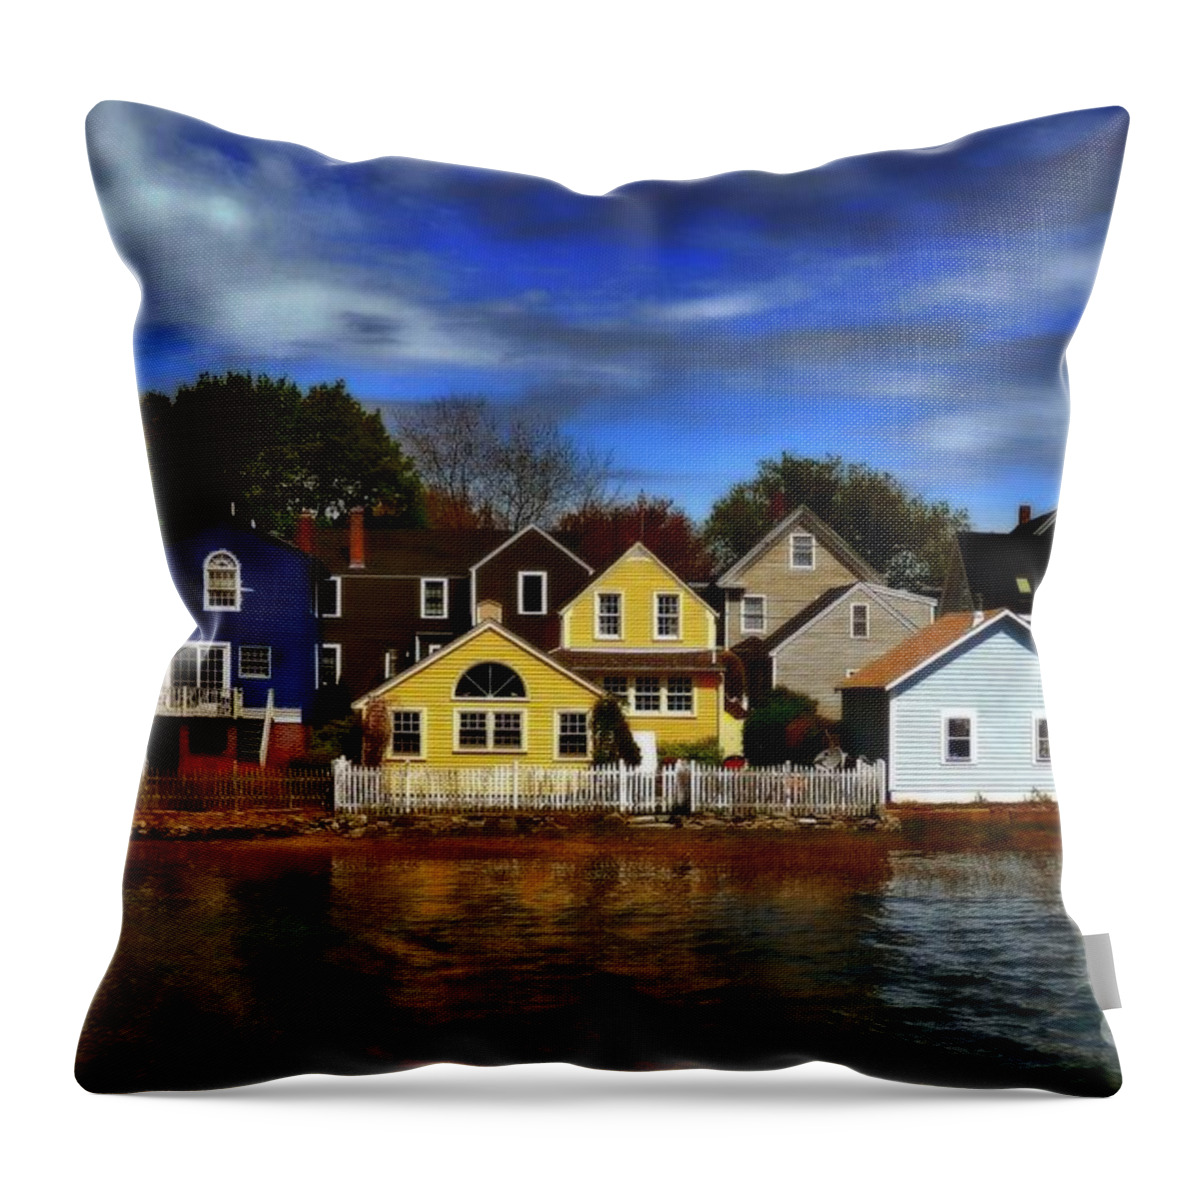 Historic Throw Pillow featuring the photograph Portsmouth Neighborhood by Marcia Lee Jones